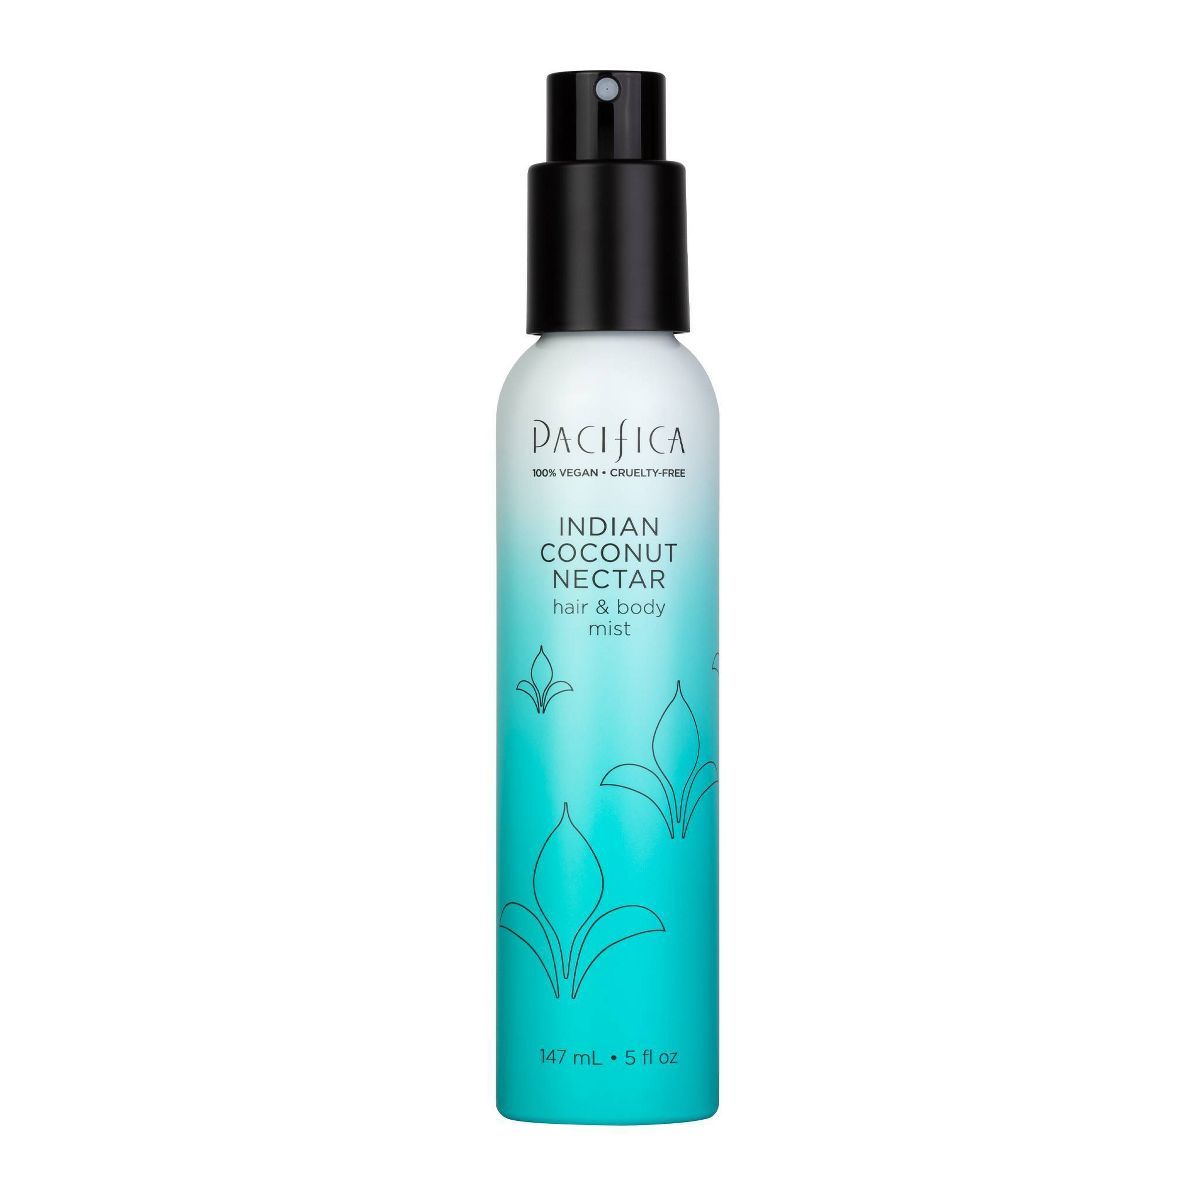 Pacifica Indian Coconut Nectar Hair and Body Mist - 5 fl oz | Target